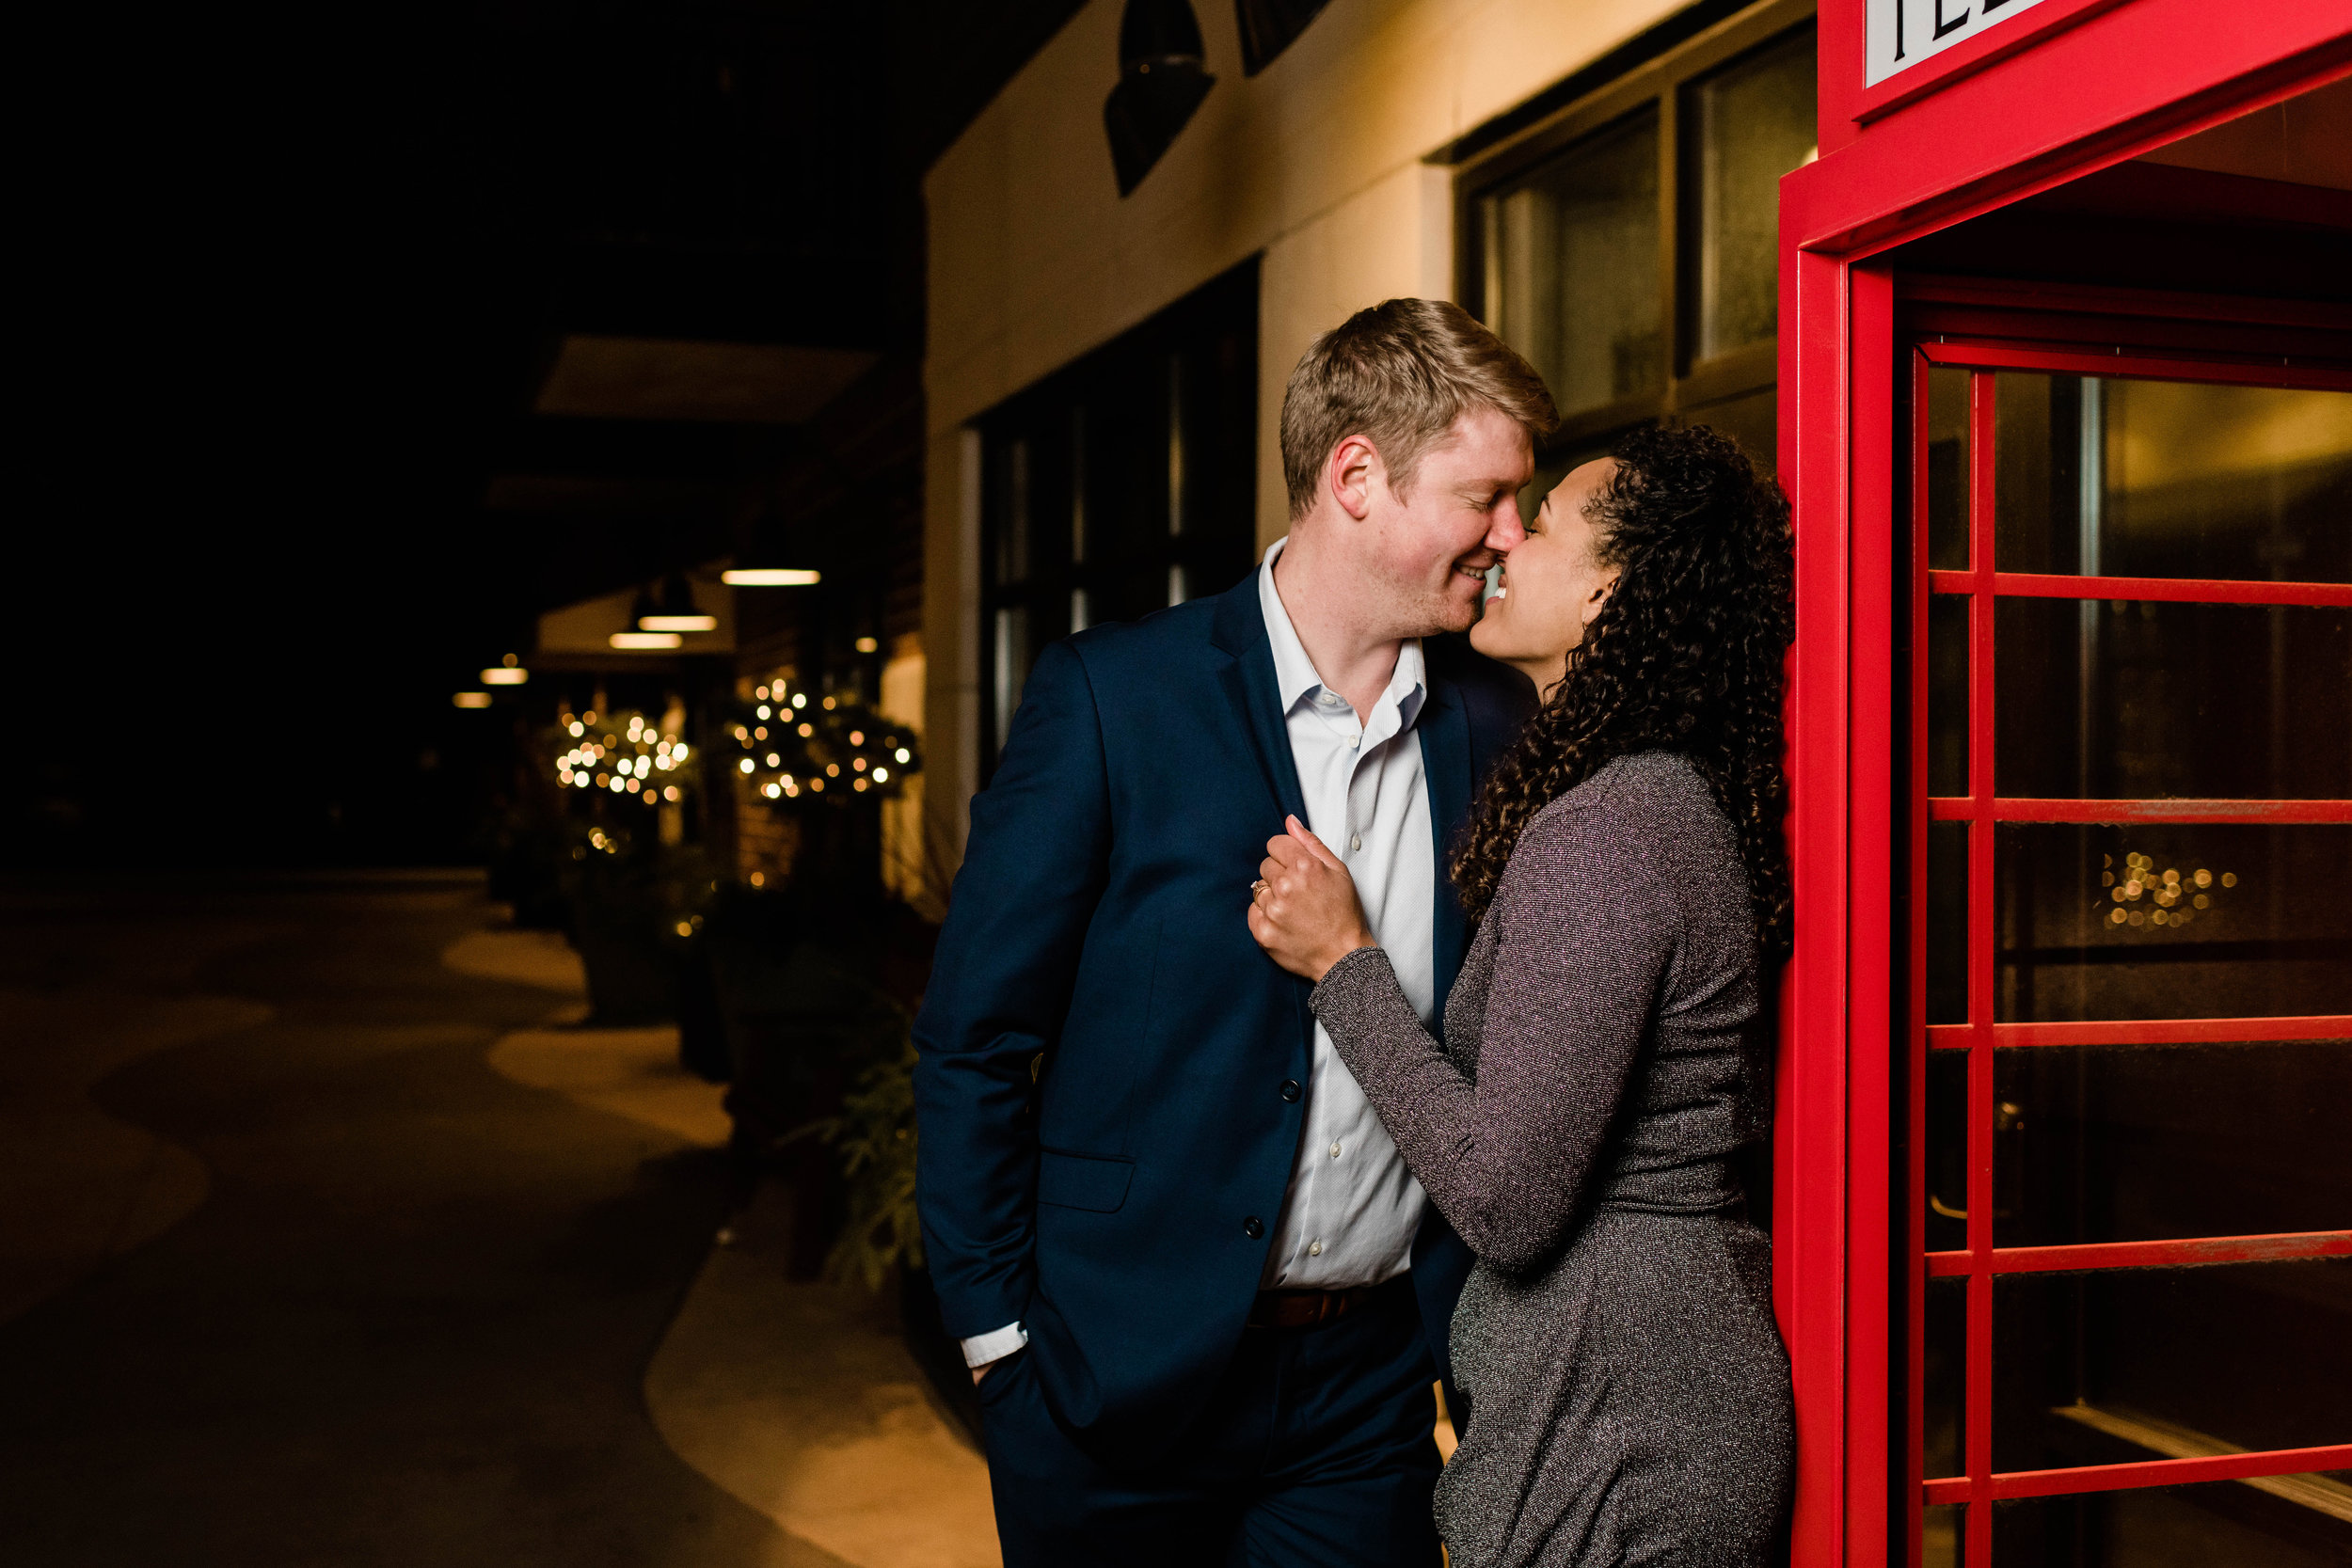 Engaged couple lean against red telephone booth